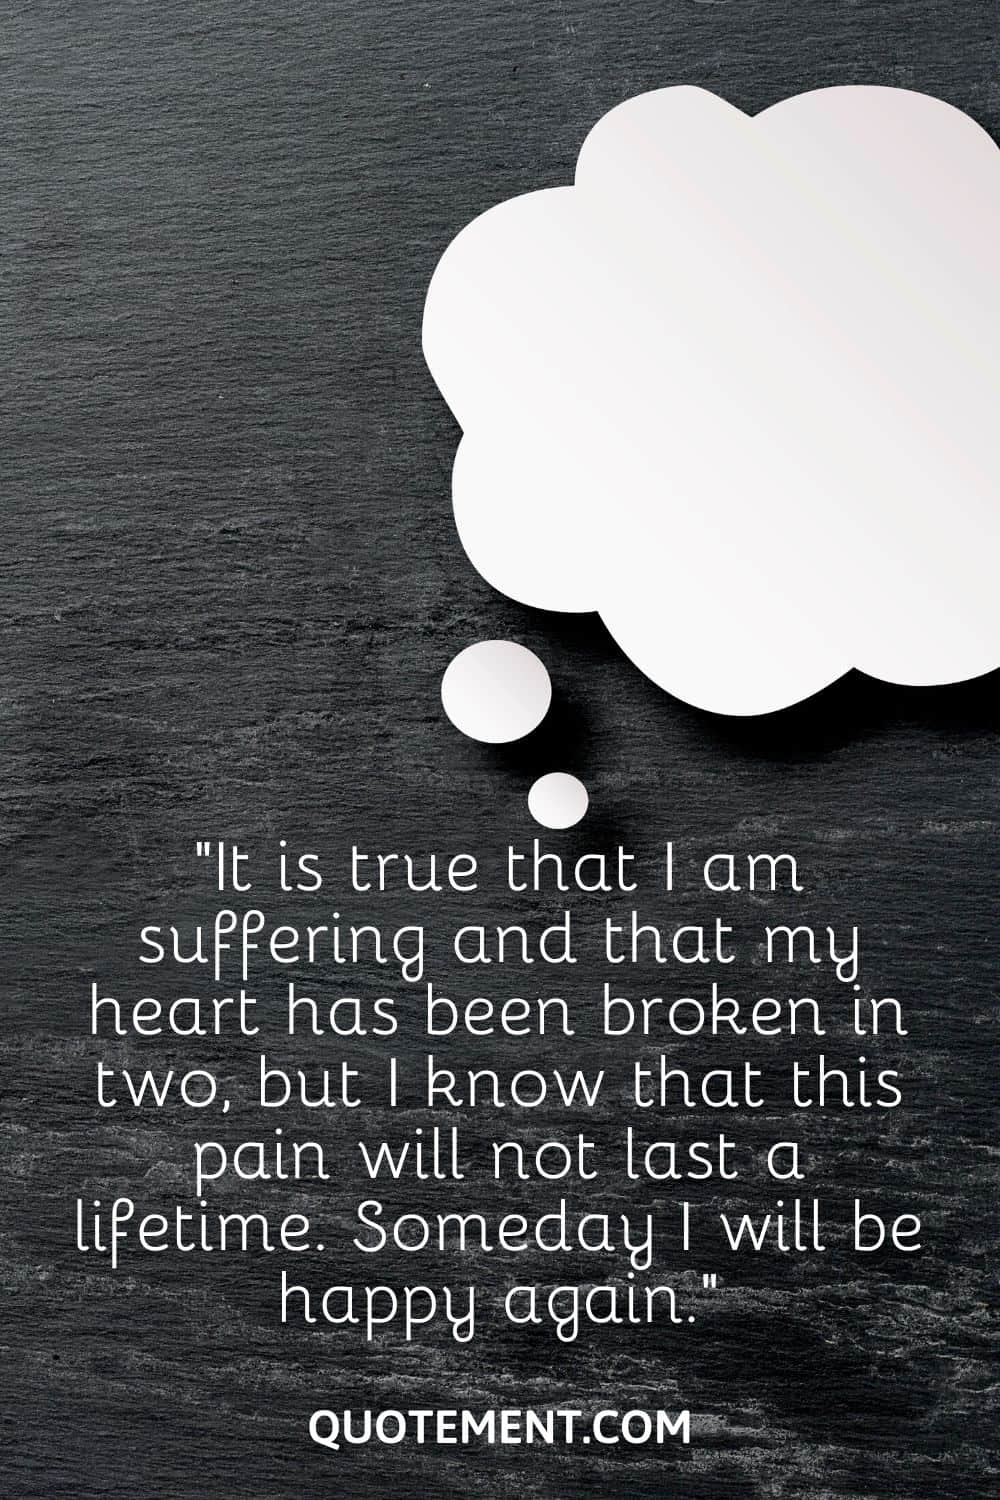 “It is true that I am suffering and that my heart has been broken in two, but I know that this pain will not last a lifetime. Someday I will be happy again.”